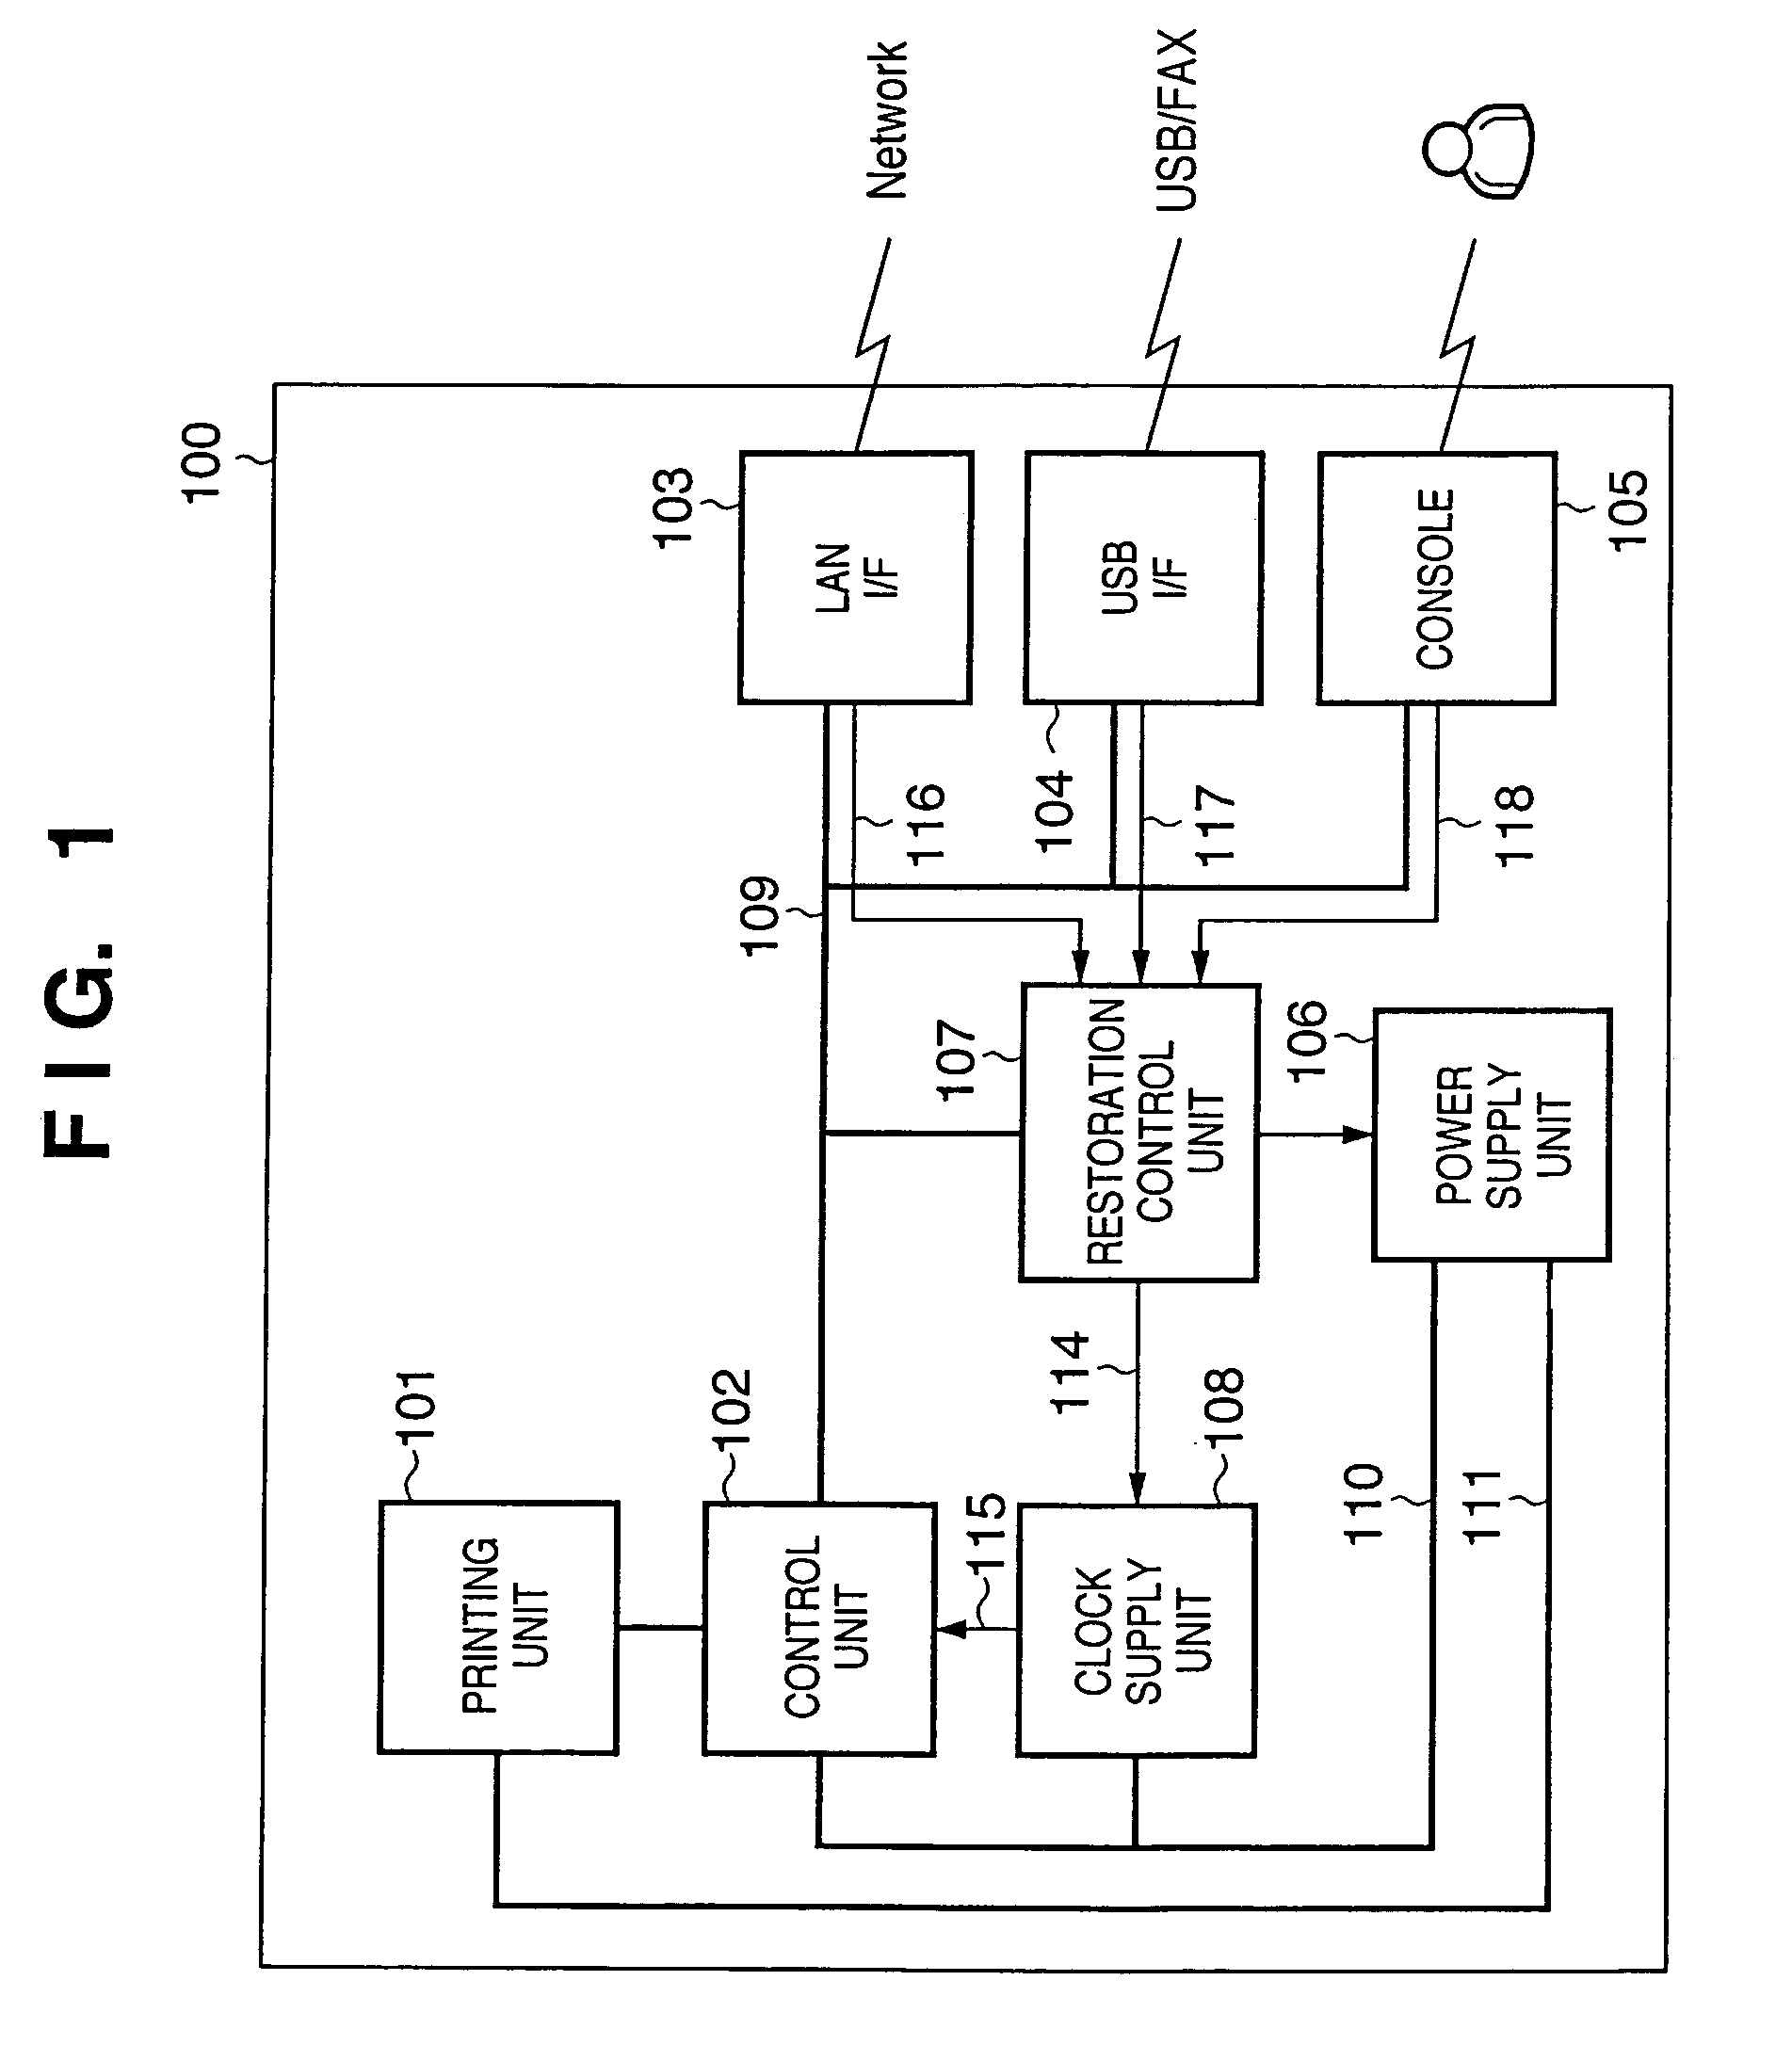 Image forming apparatus and method of controlling same